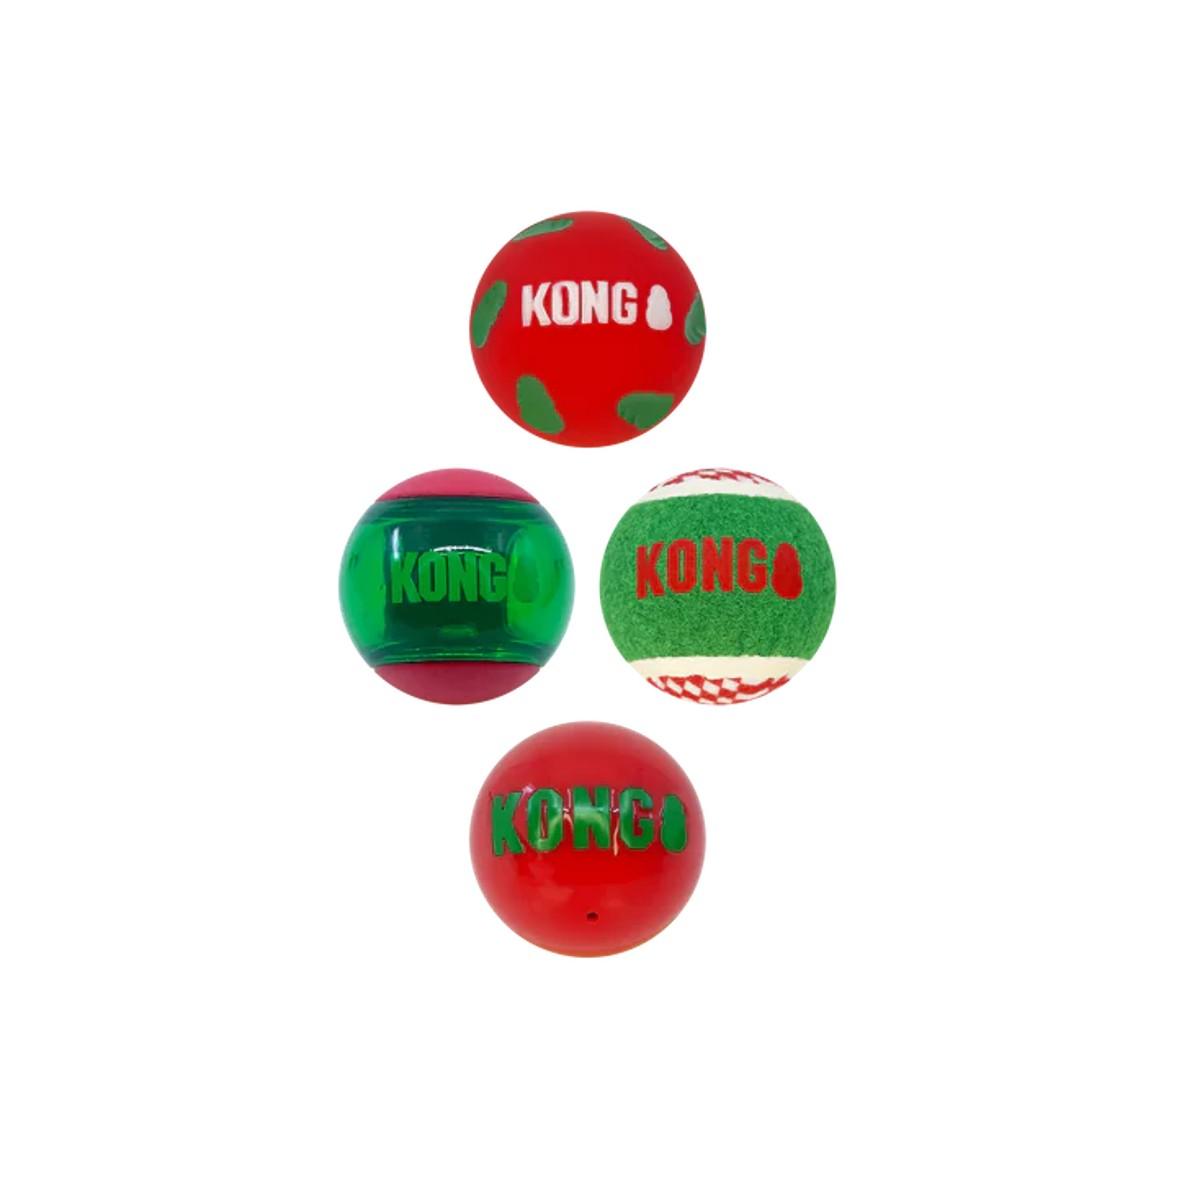 KONG Holiday Occasions Balls Dog Toy, Assorted, Medium, 4-pk (Size: 4-pk)